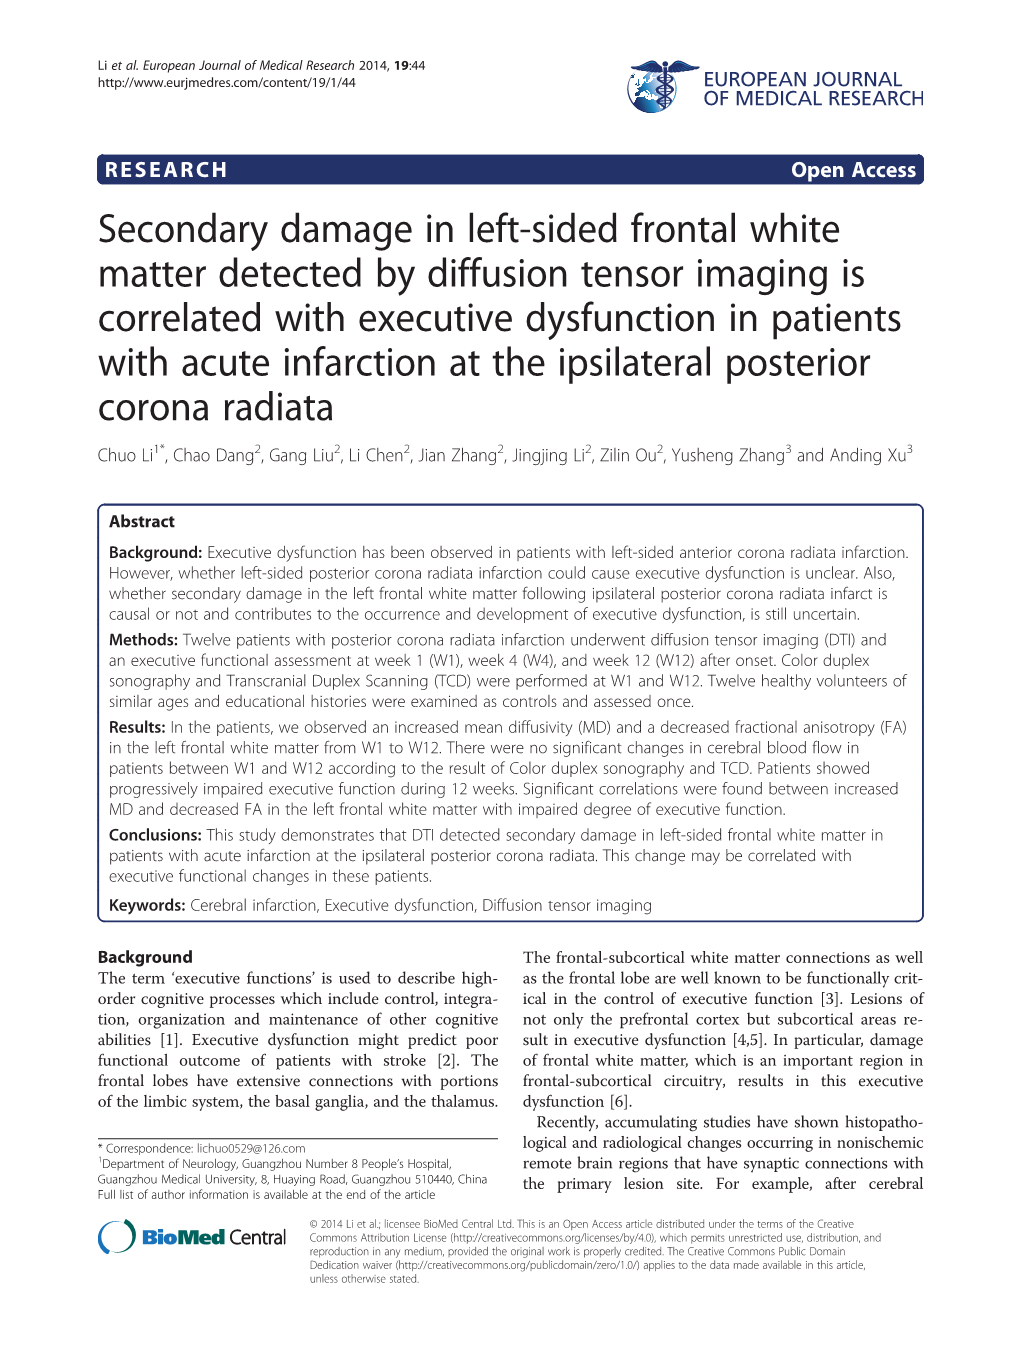 Secondary Damage in Left-Sided Frontal White Matter Detected By